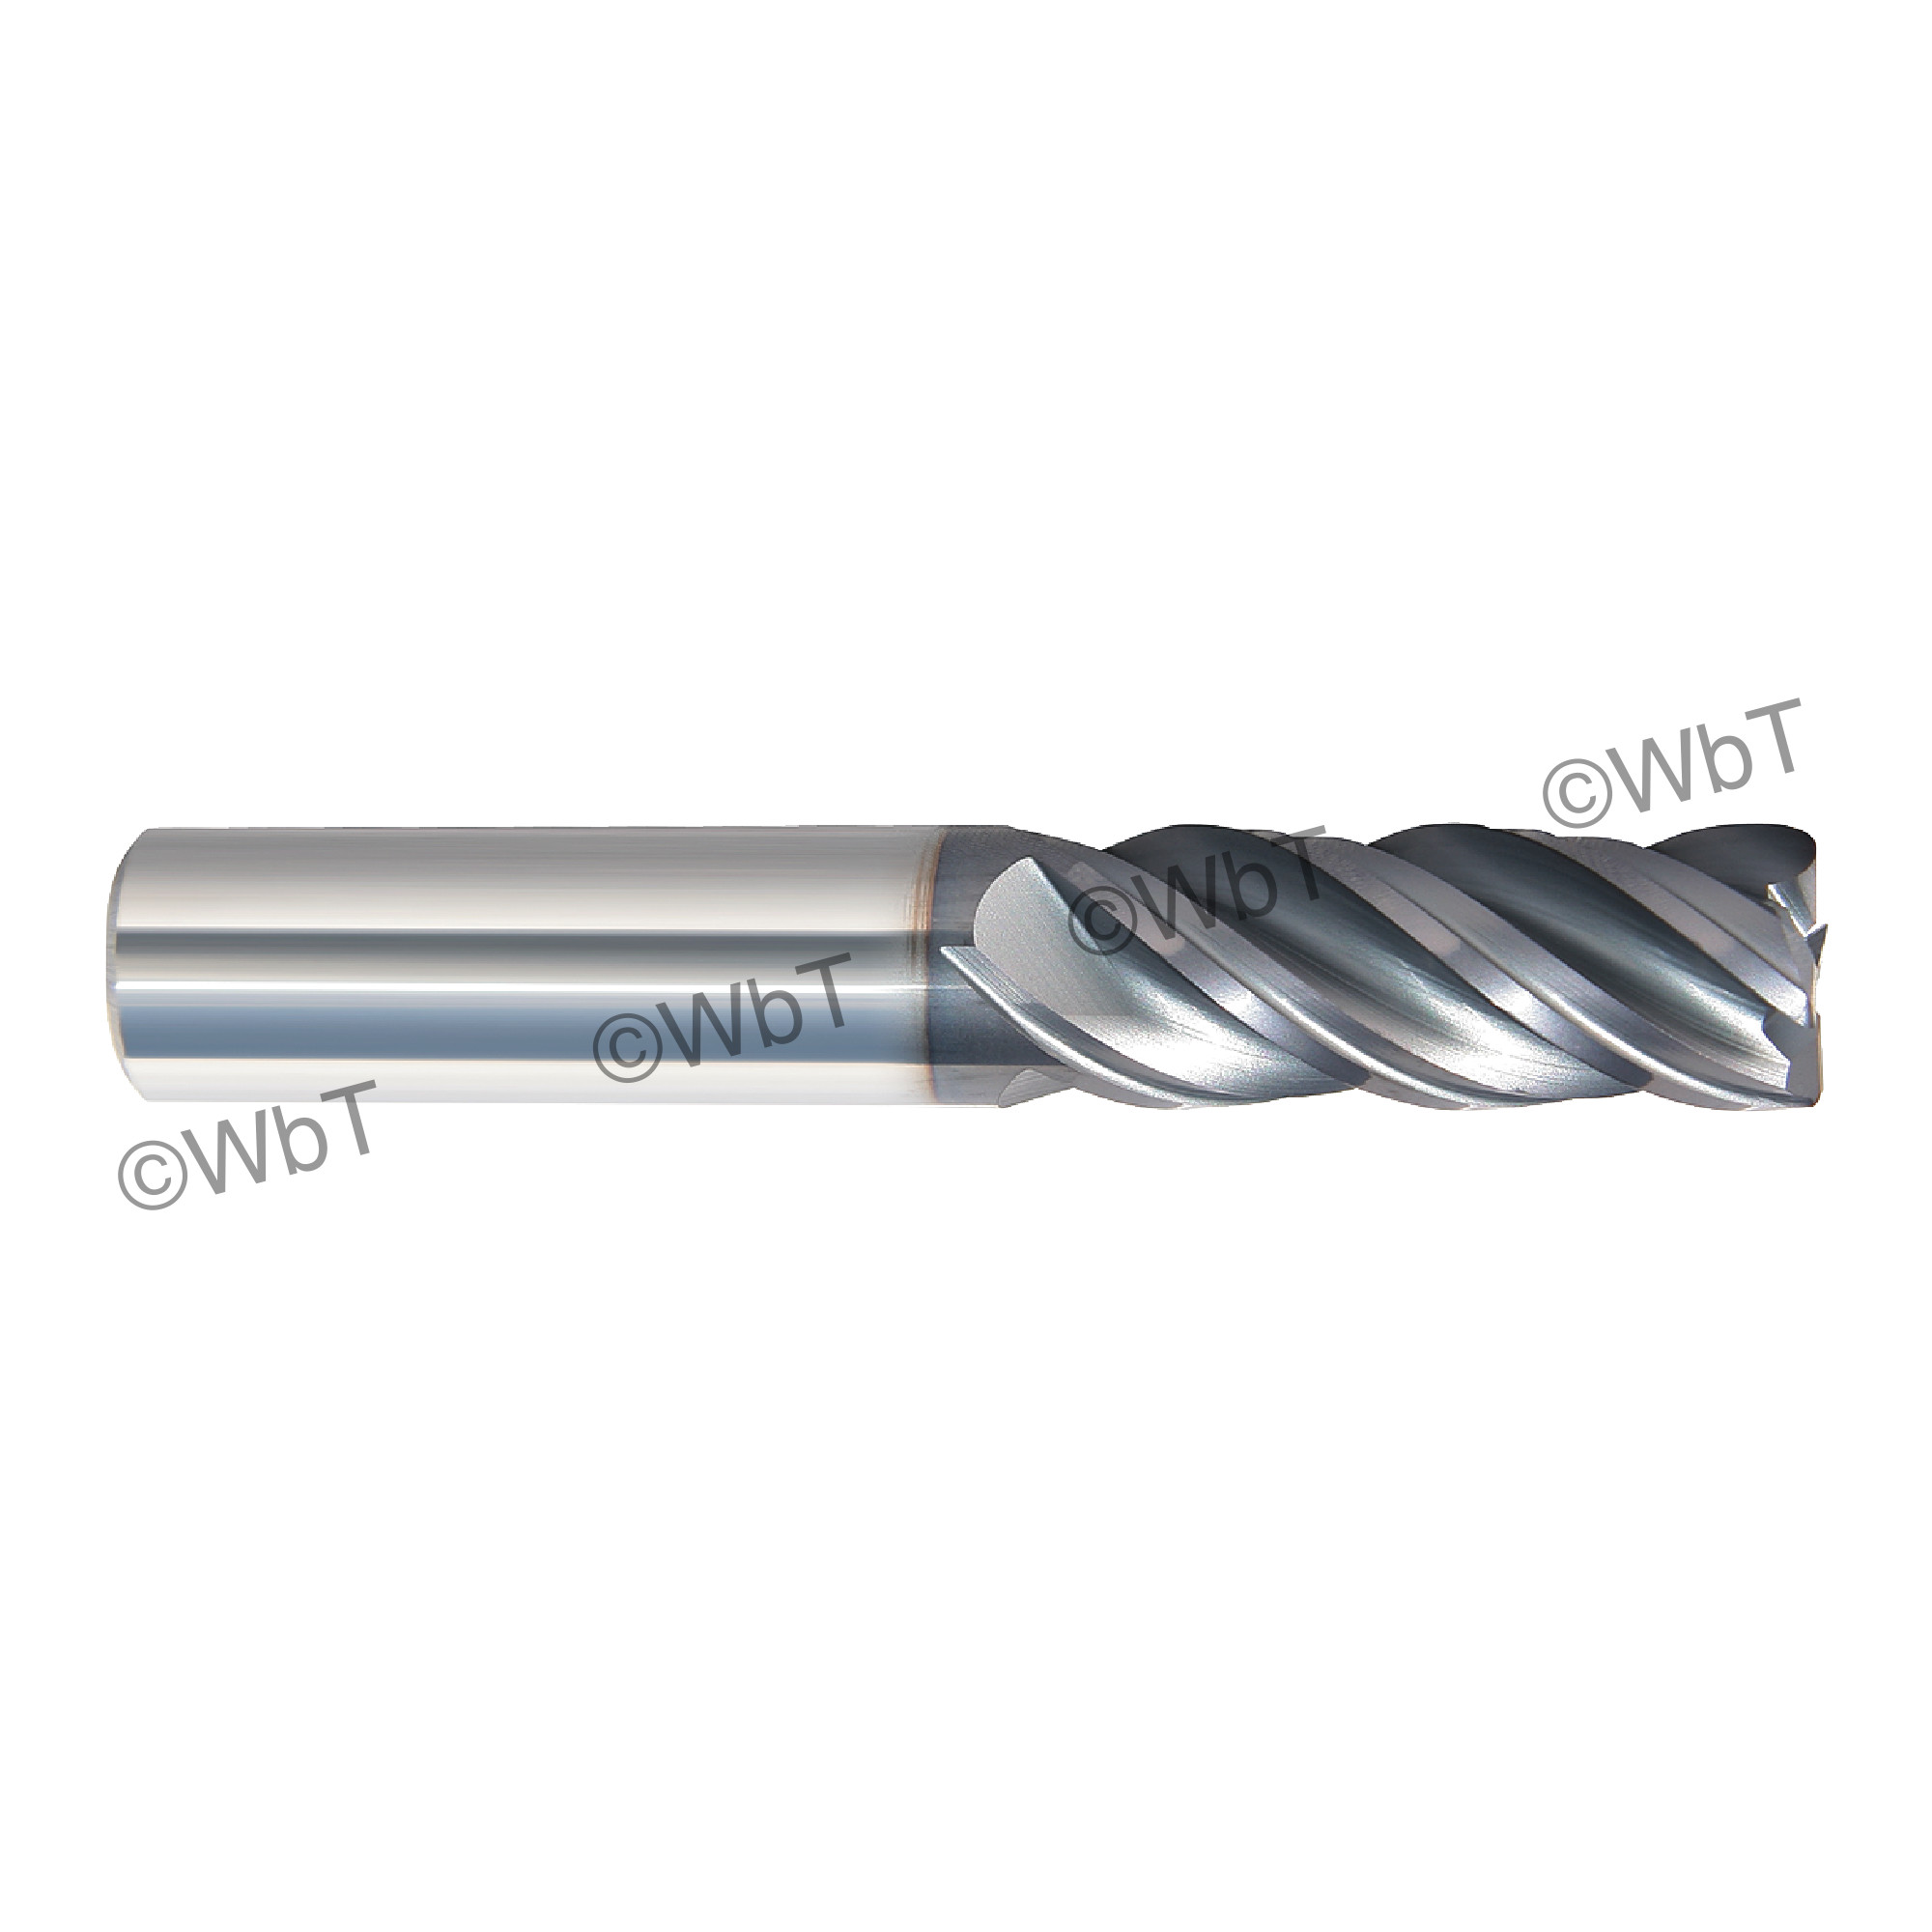 Rushmore USA 1/4" x 3/4" Flute Solid Carbide Variable Helix Unequal Index AlTiN Coated Corner Radius 4 Flute Roughing & 